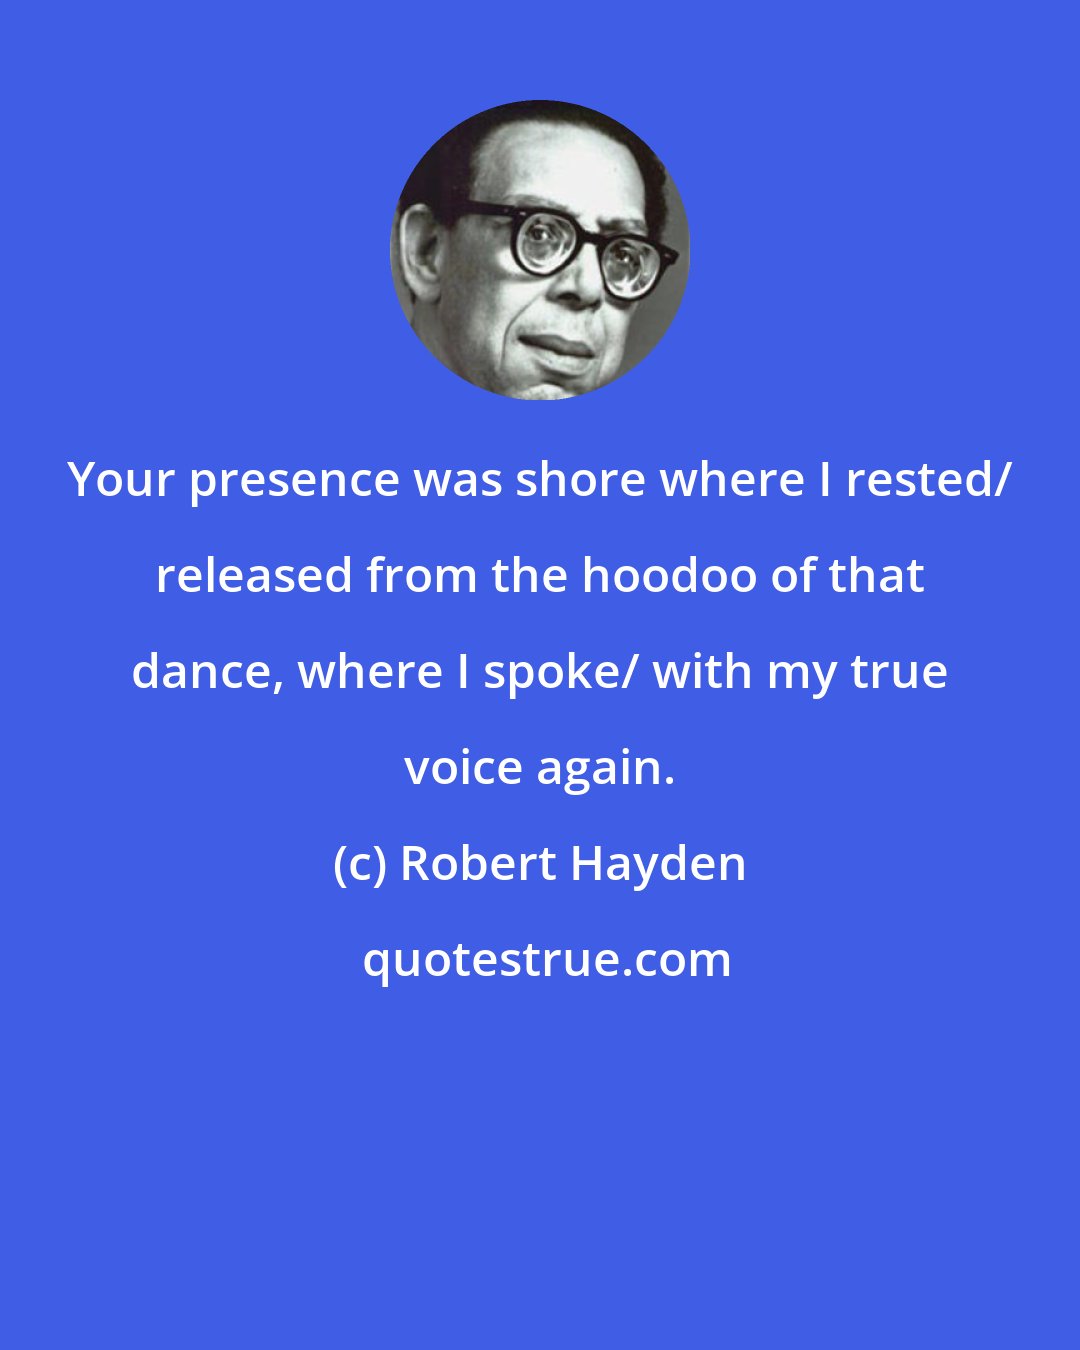 Robert Hayden: Your presence was shore where I rested/ released from the hoodoo of that dance, where I spoke/ with my true voice again.